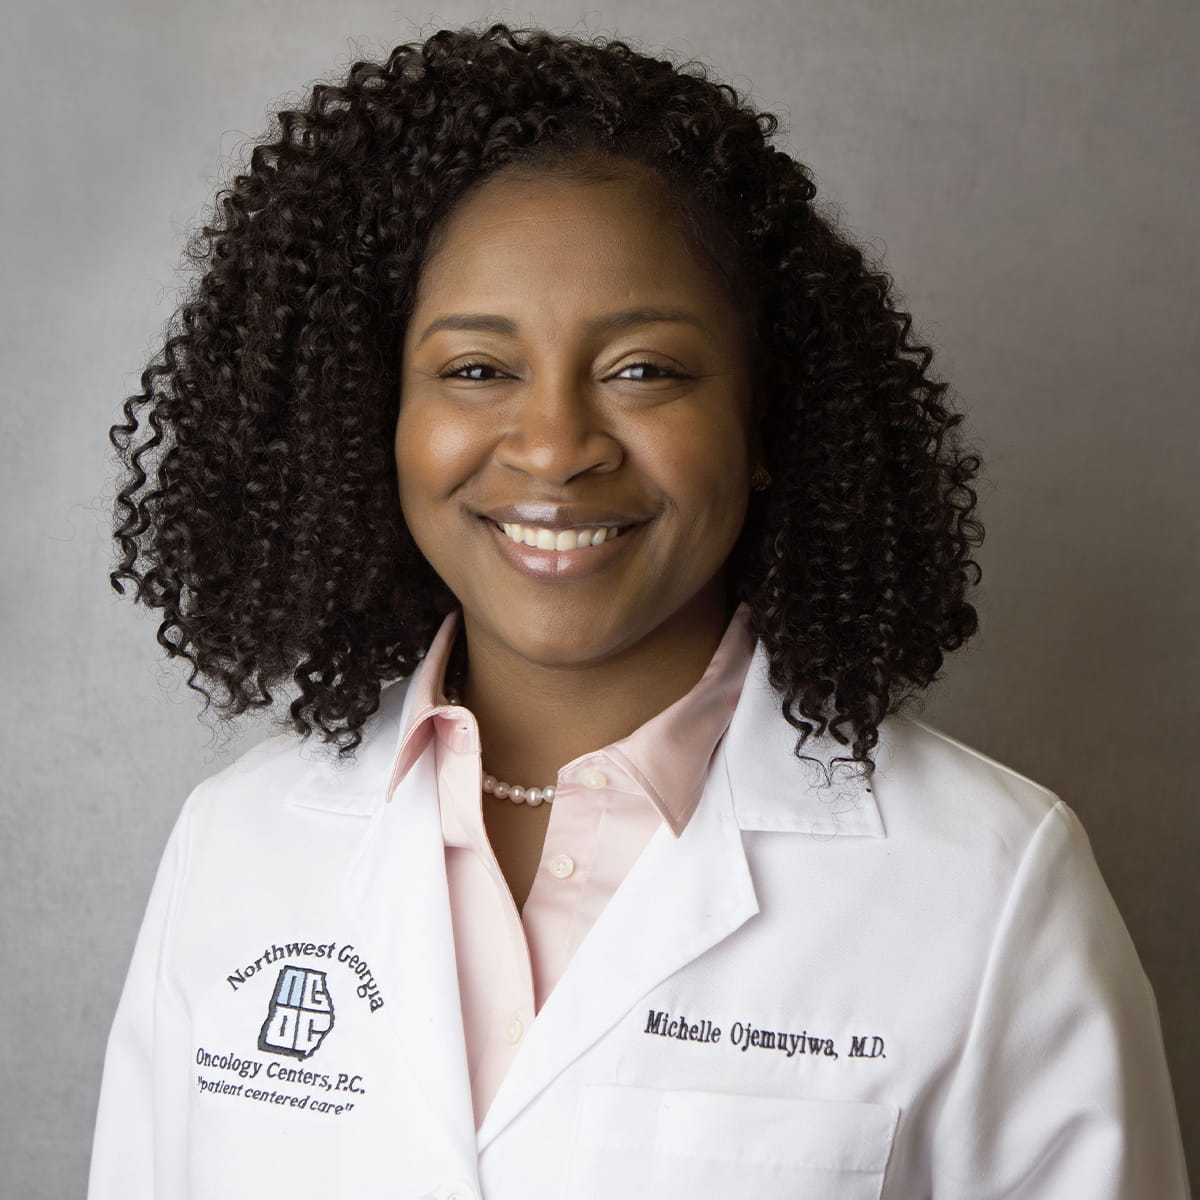 A friendly photo of Michelle Ojemuyiwa, MD